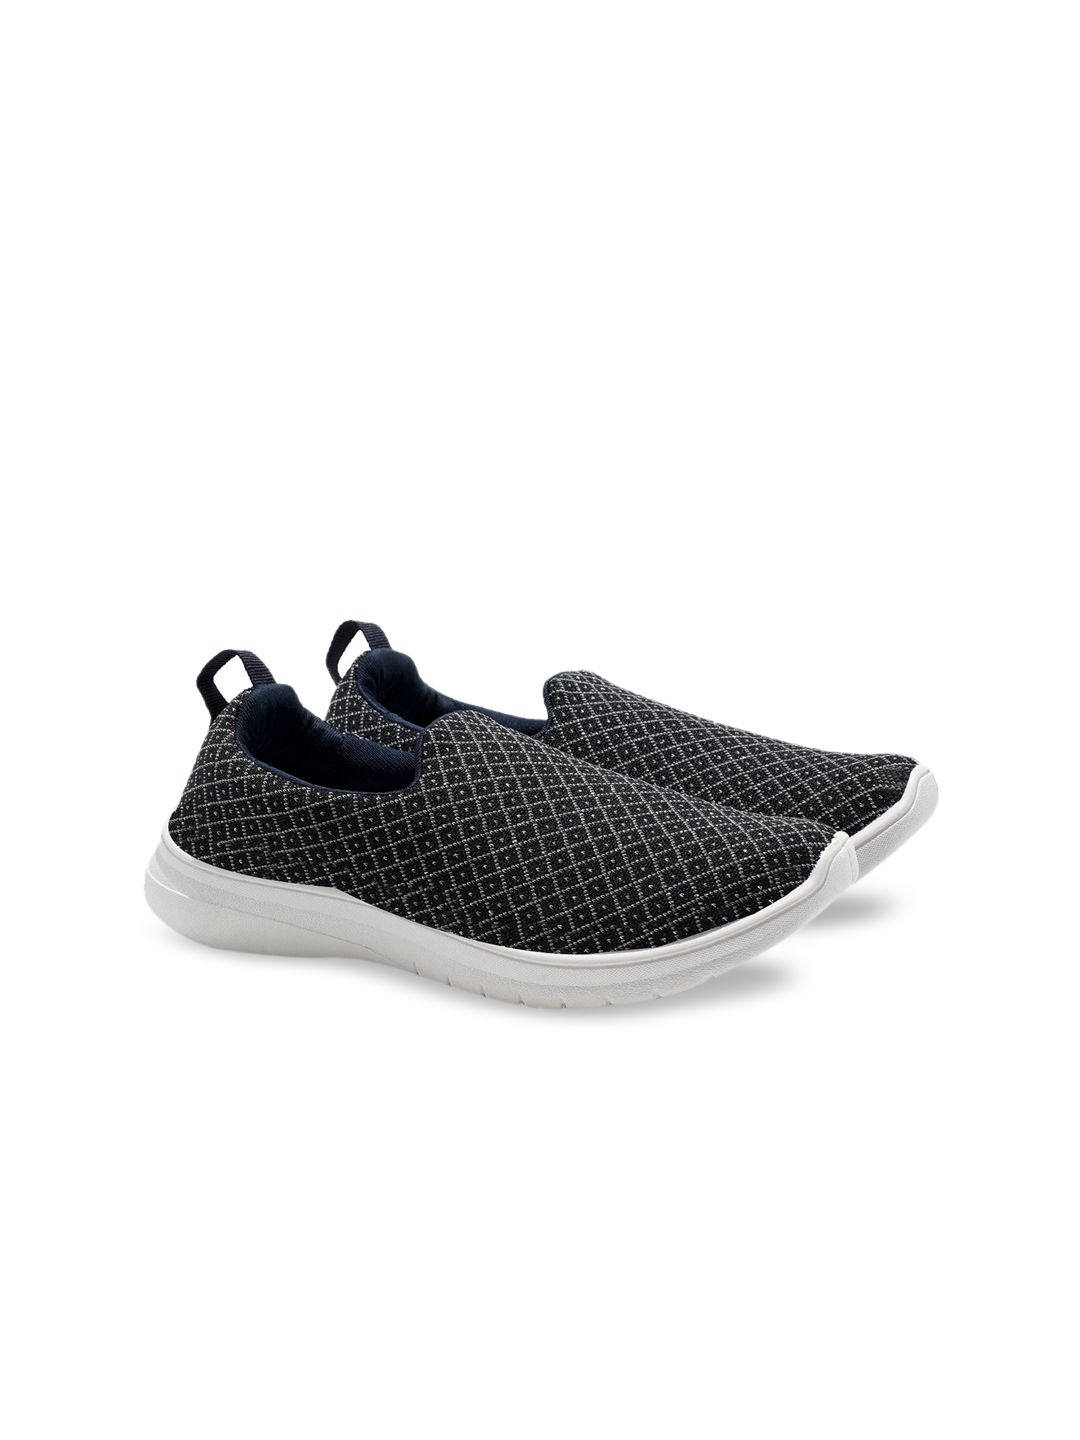 ASIAN Women Woven Design Slip-On Sneakers Price in India